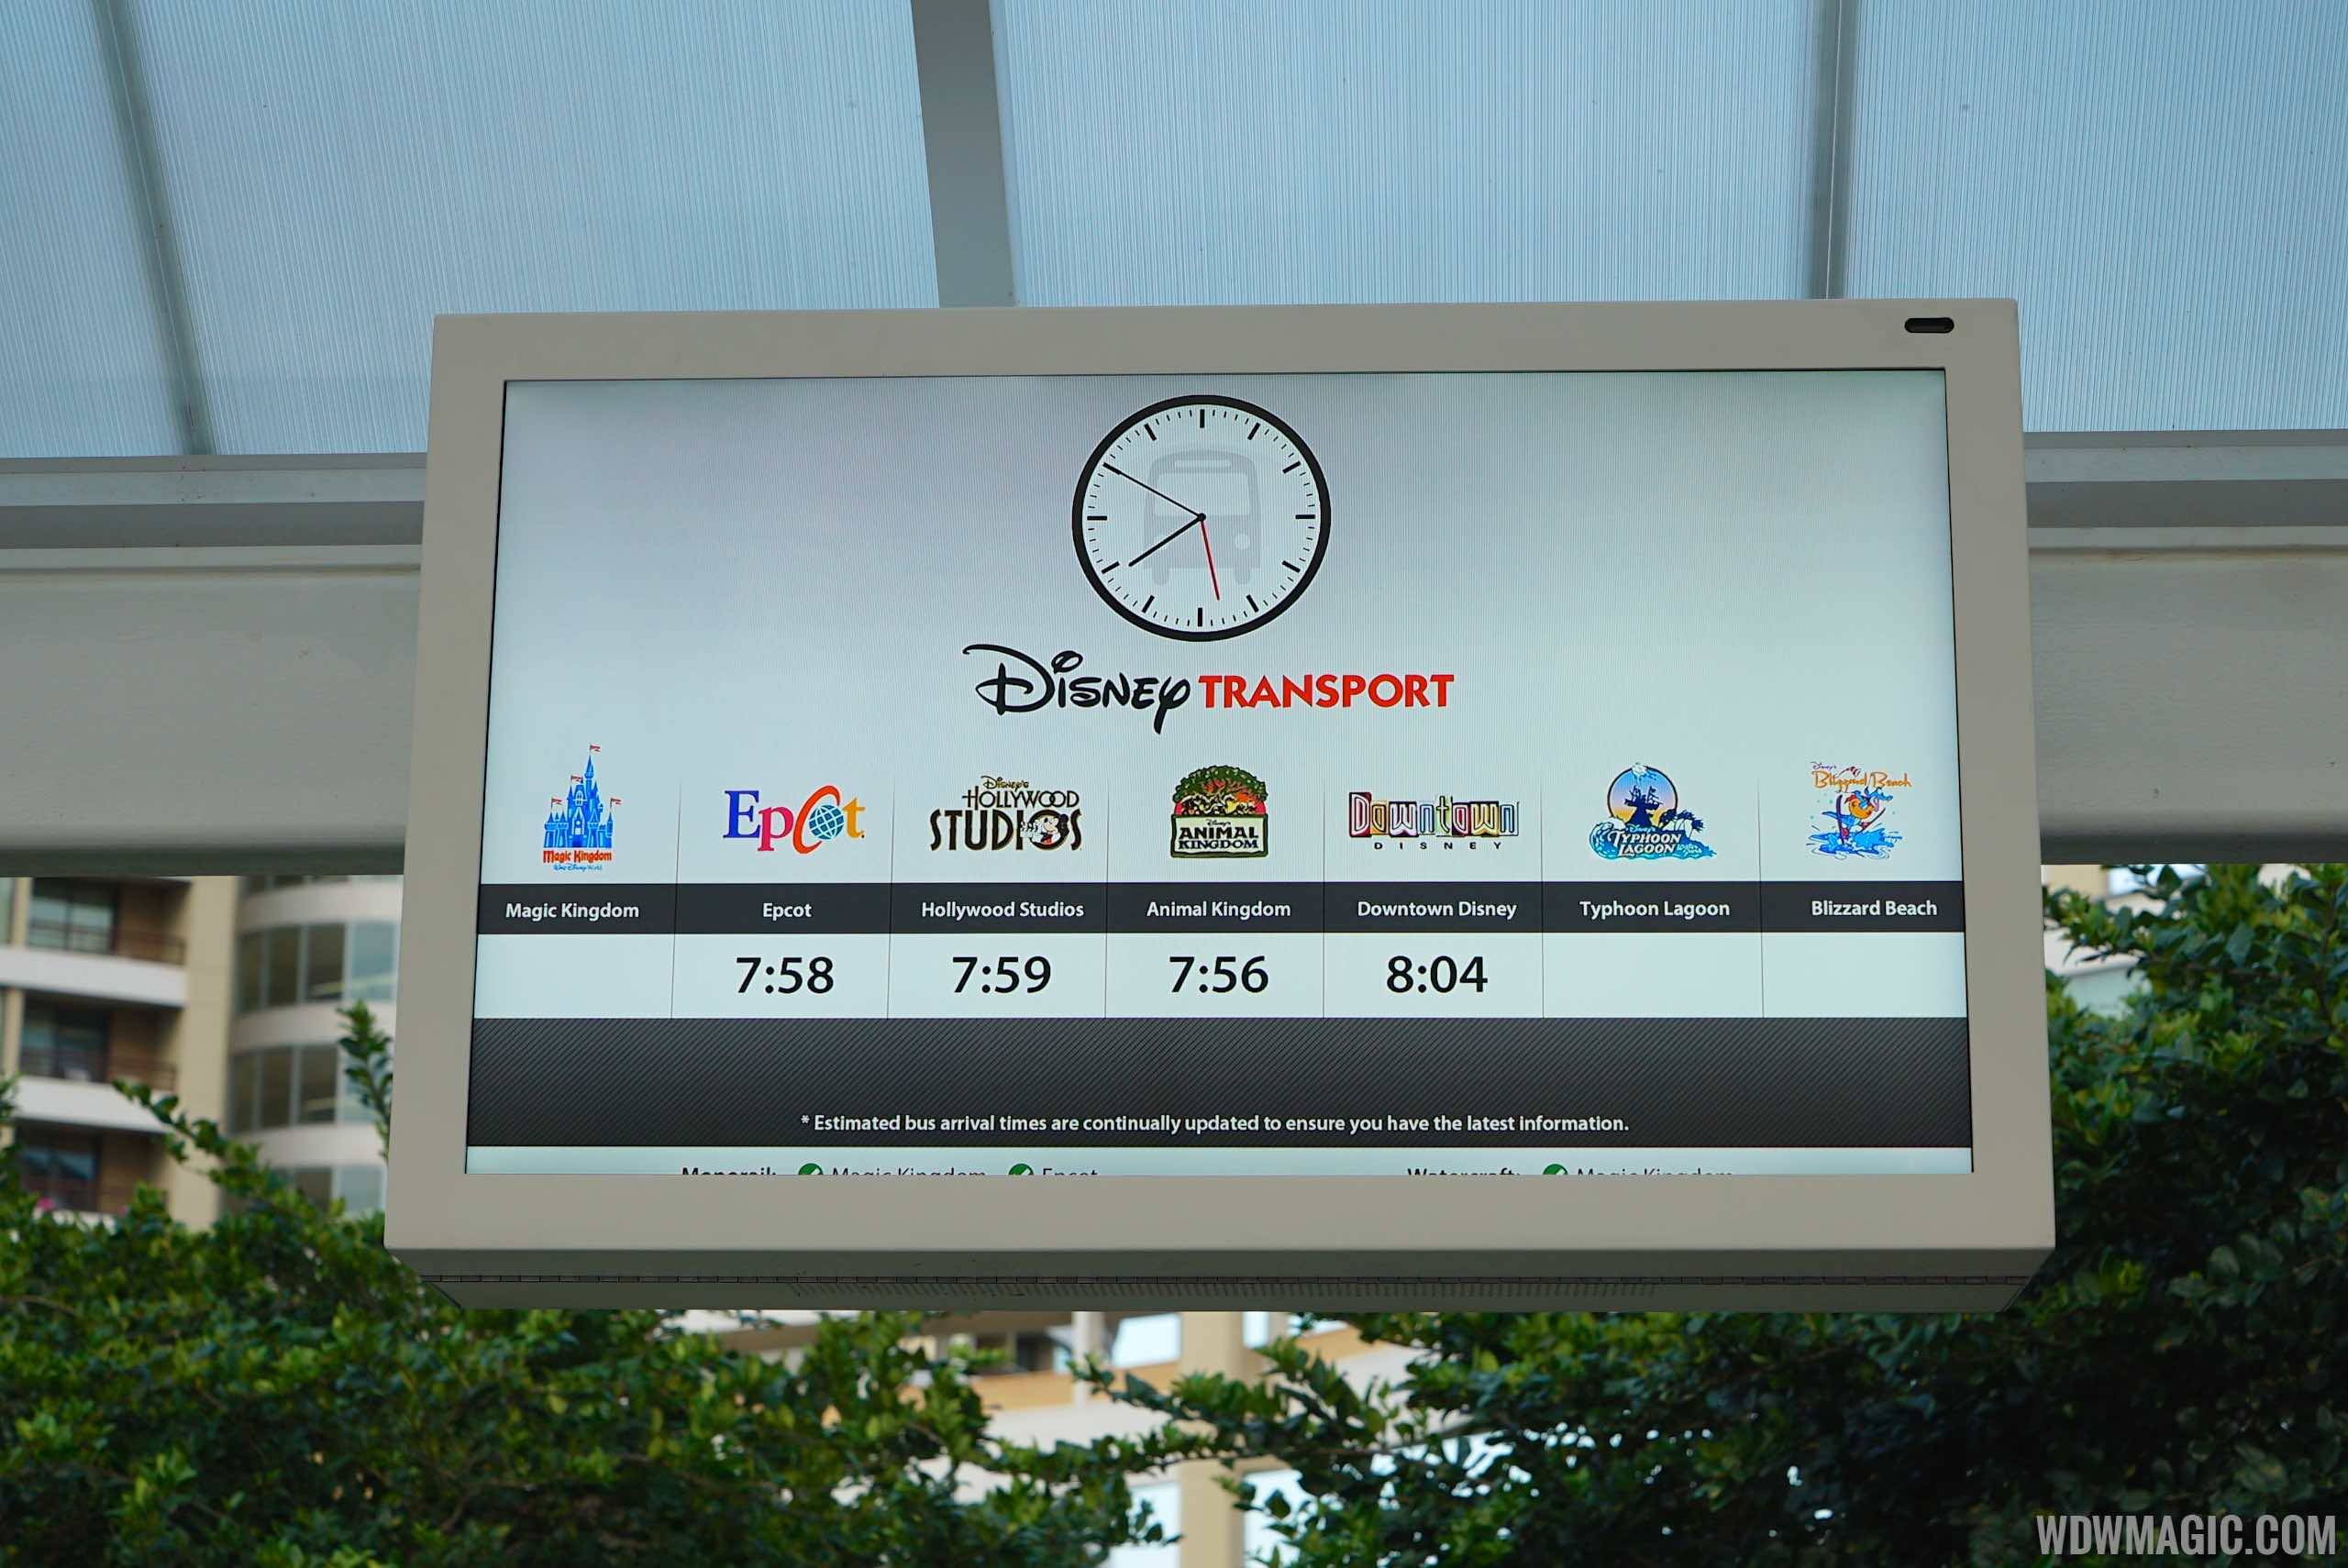 PHOTOS - Disney's Contemporary Resort bus stop adds arrival time screens